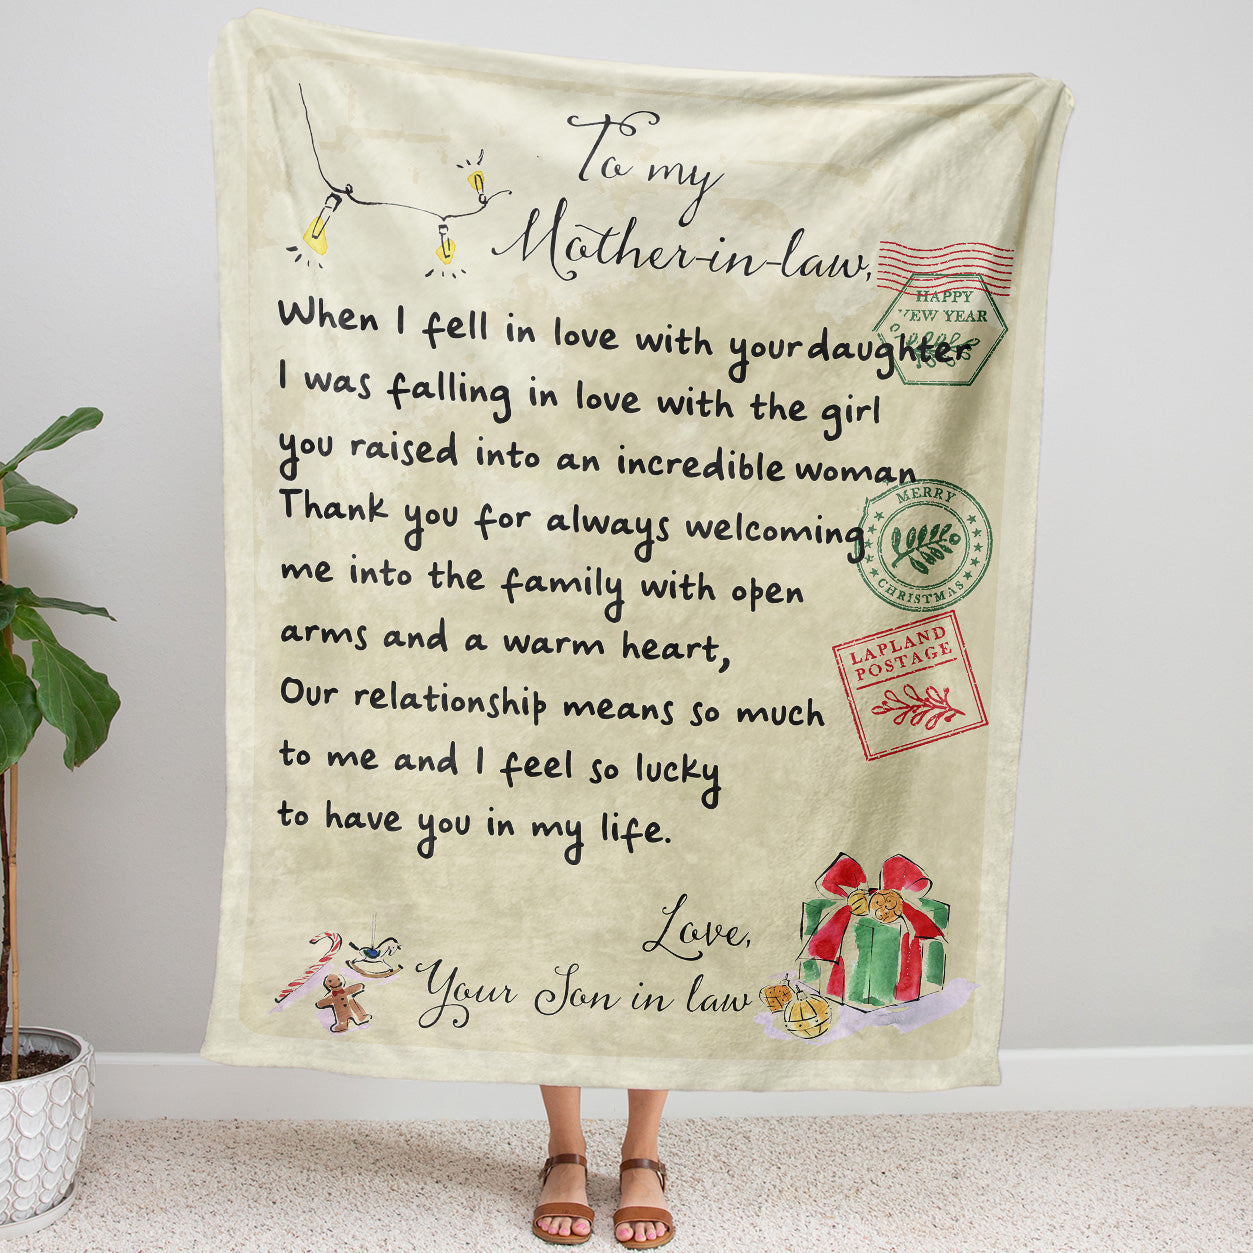 Blanket Christmas Gift ideas for Mother in Law from Son in Law Customize Personalize Love with Your Daughter 20121102 - Sherpa Blanket